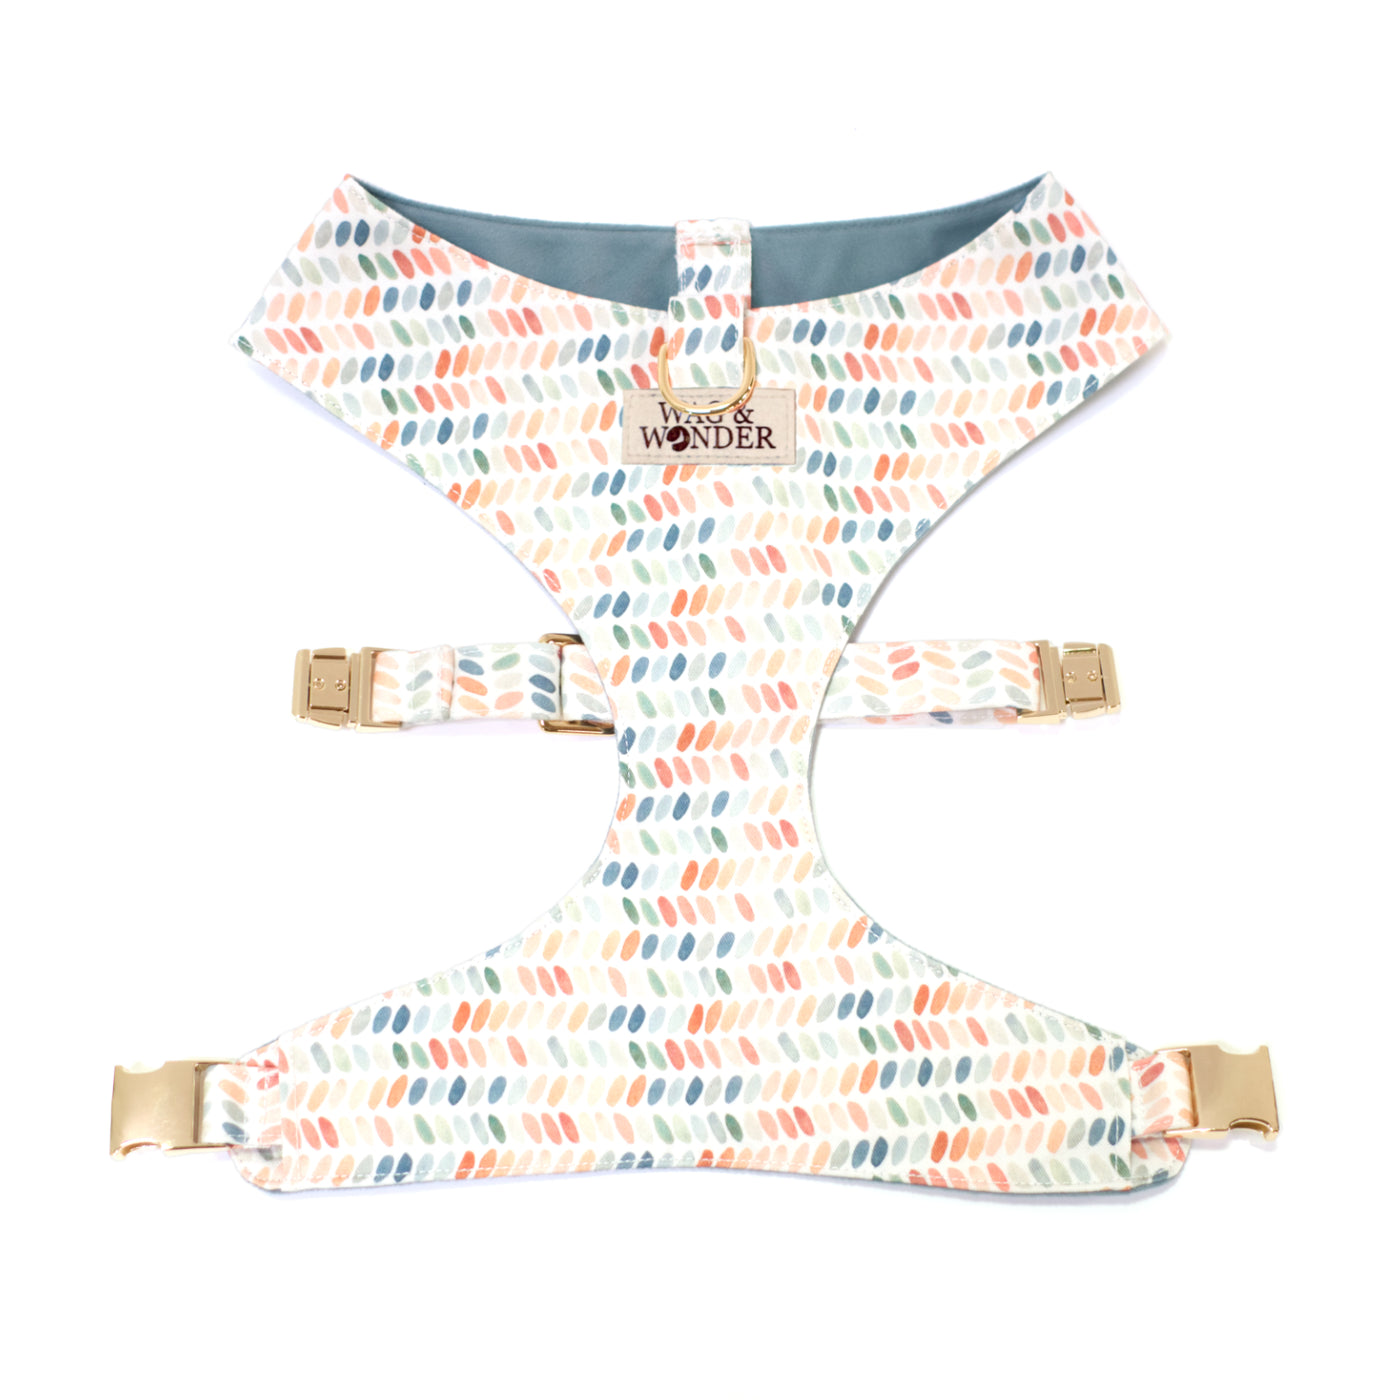 Polka dot reversible dog harness with gold hardware.